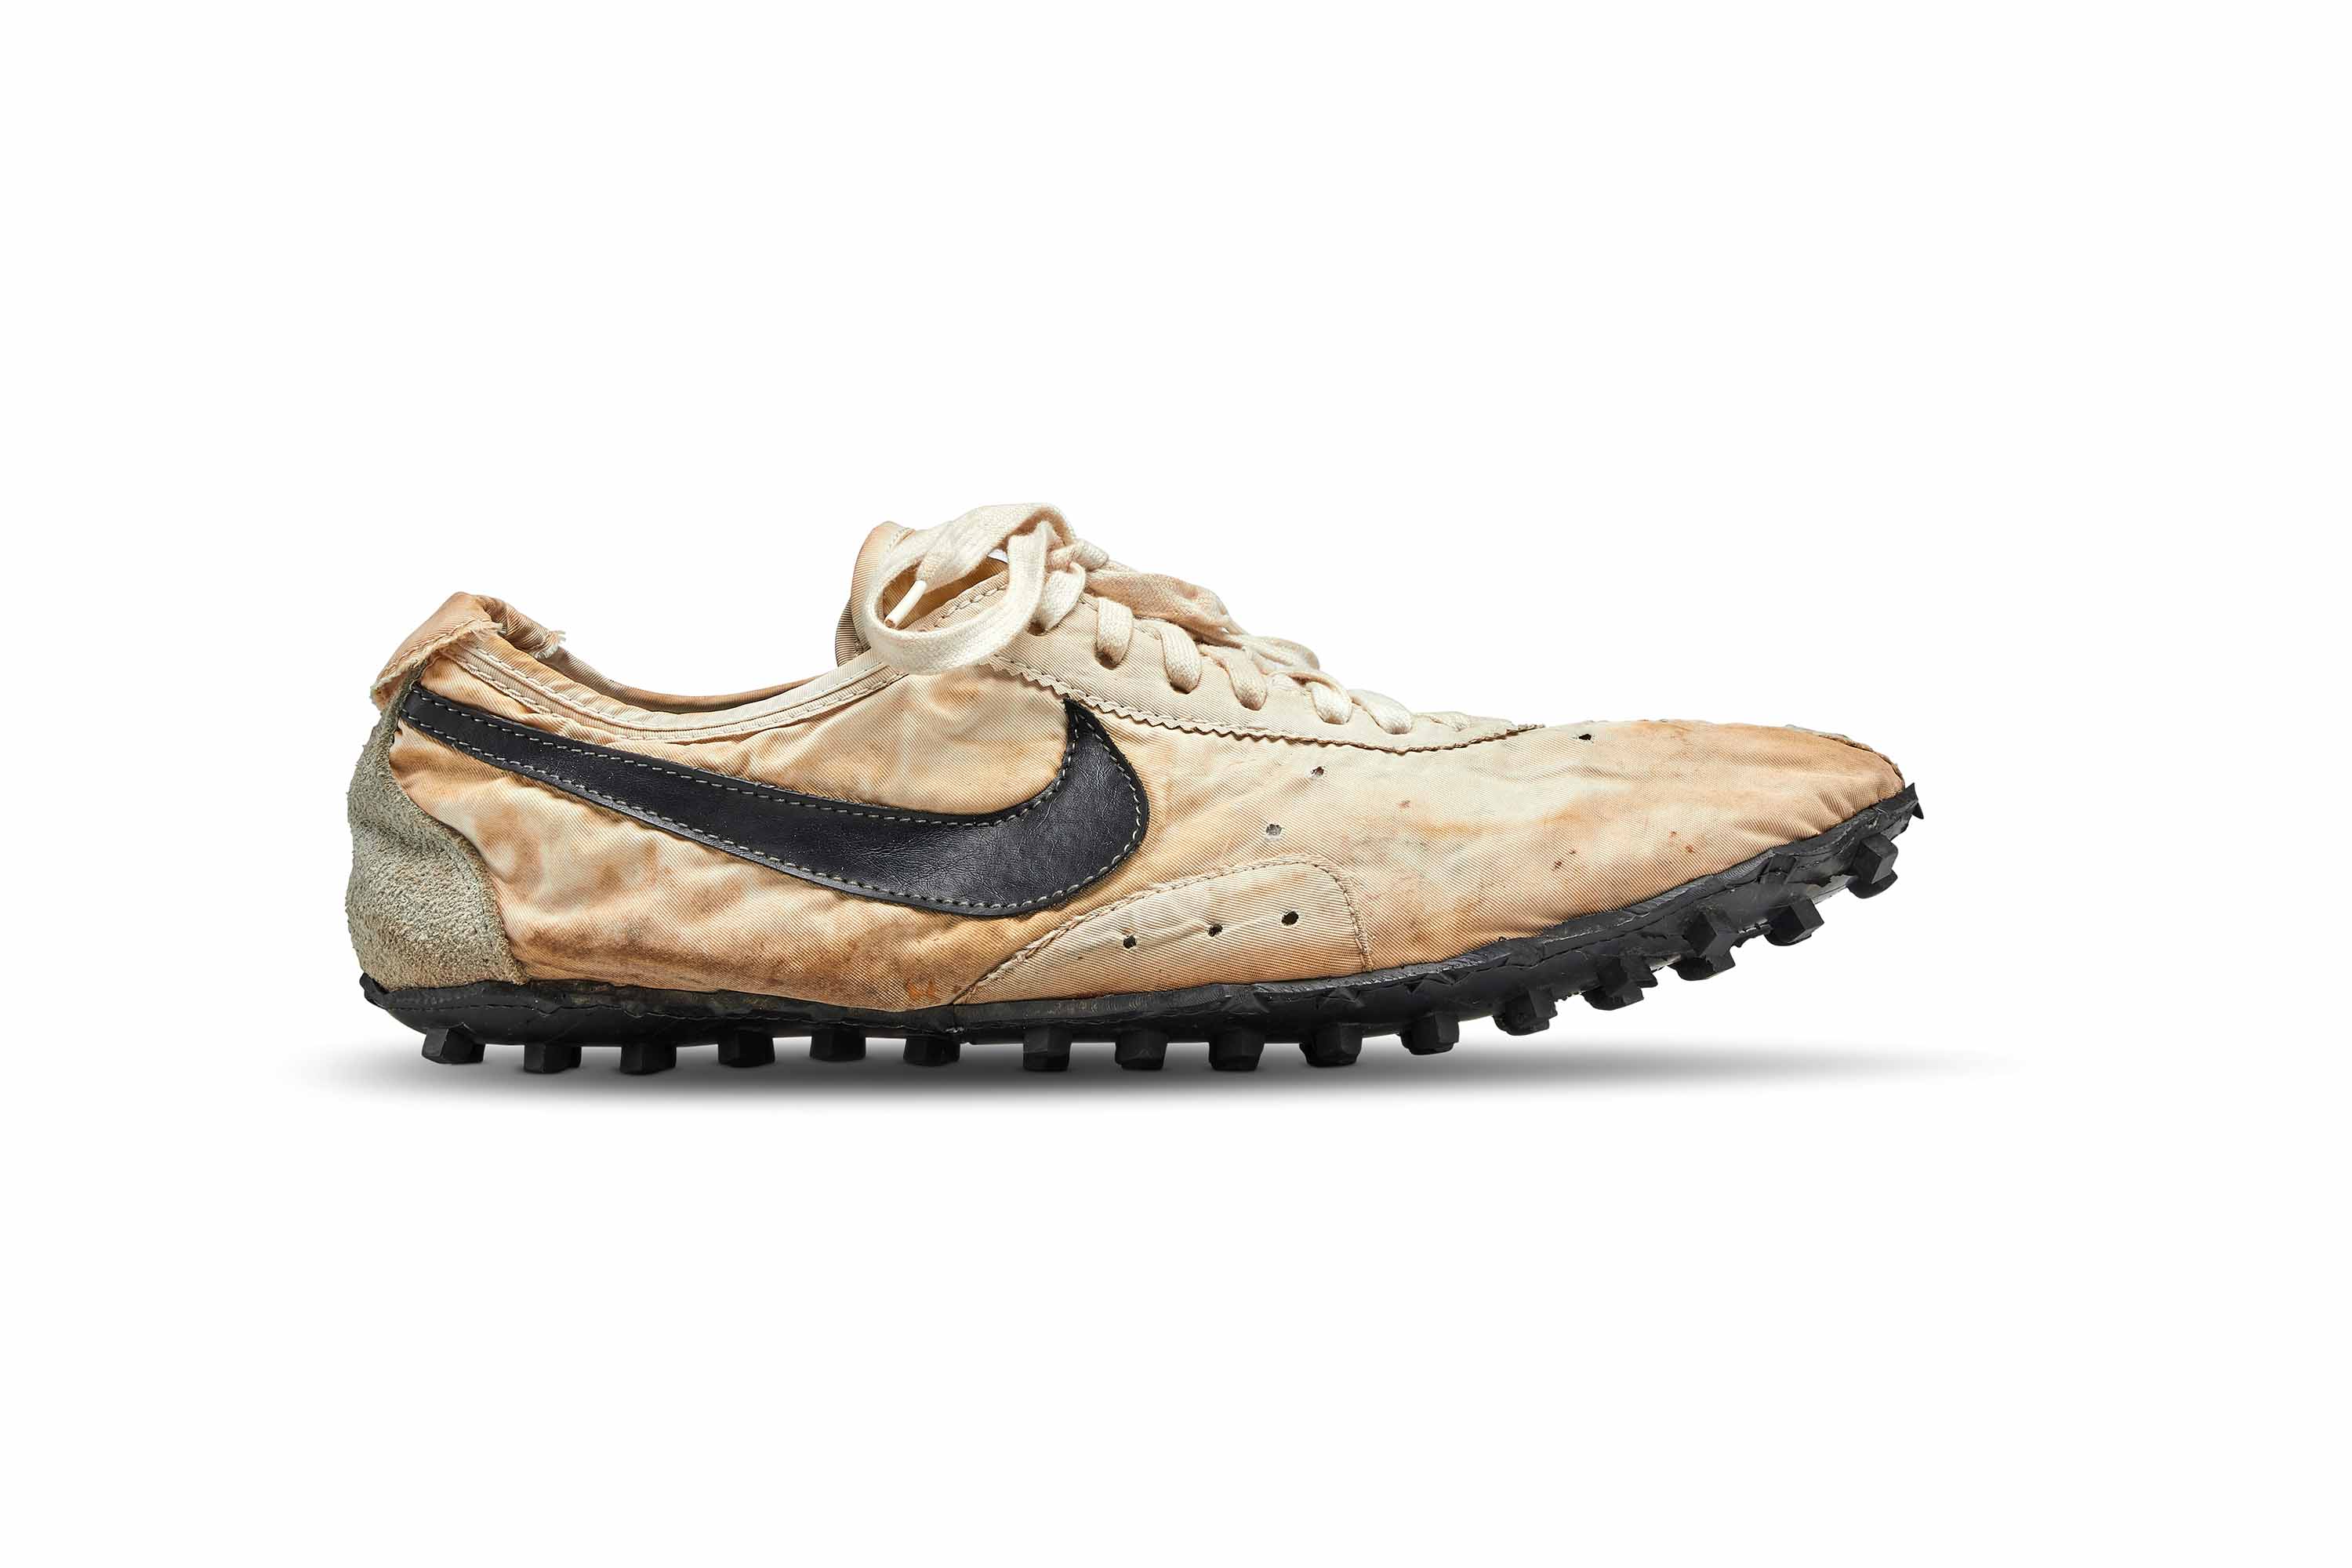 Rare Nike 'Moon Shoe' up for auction at 